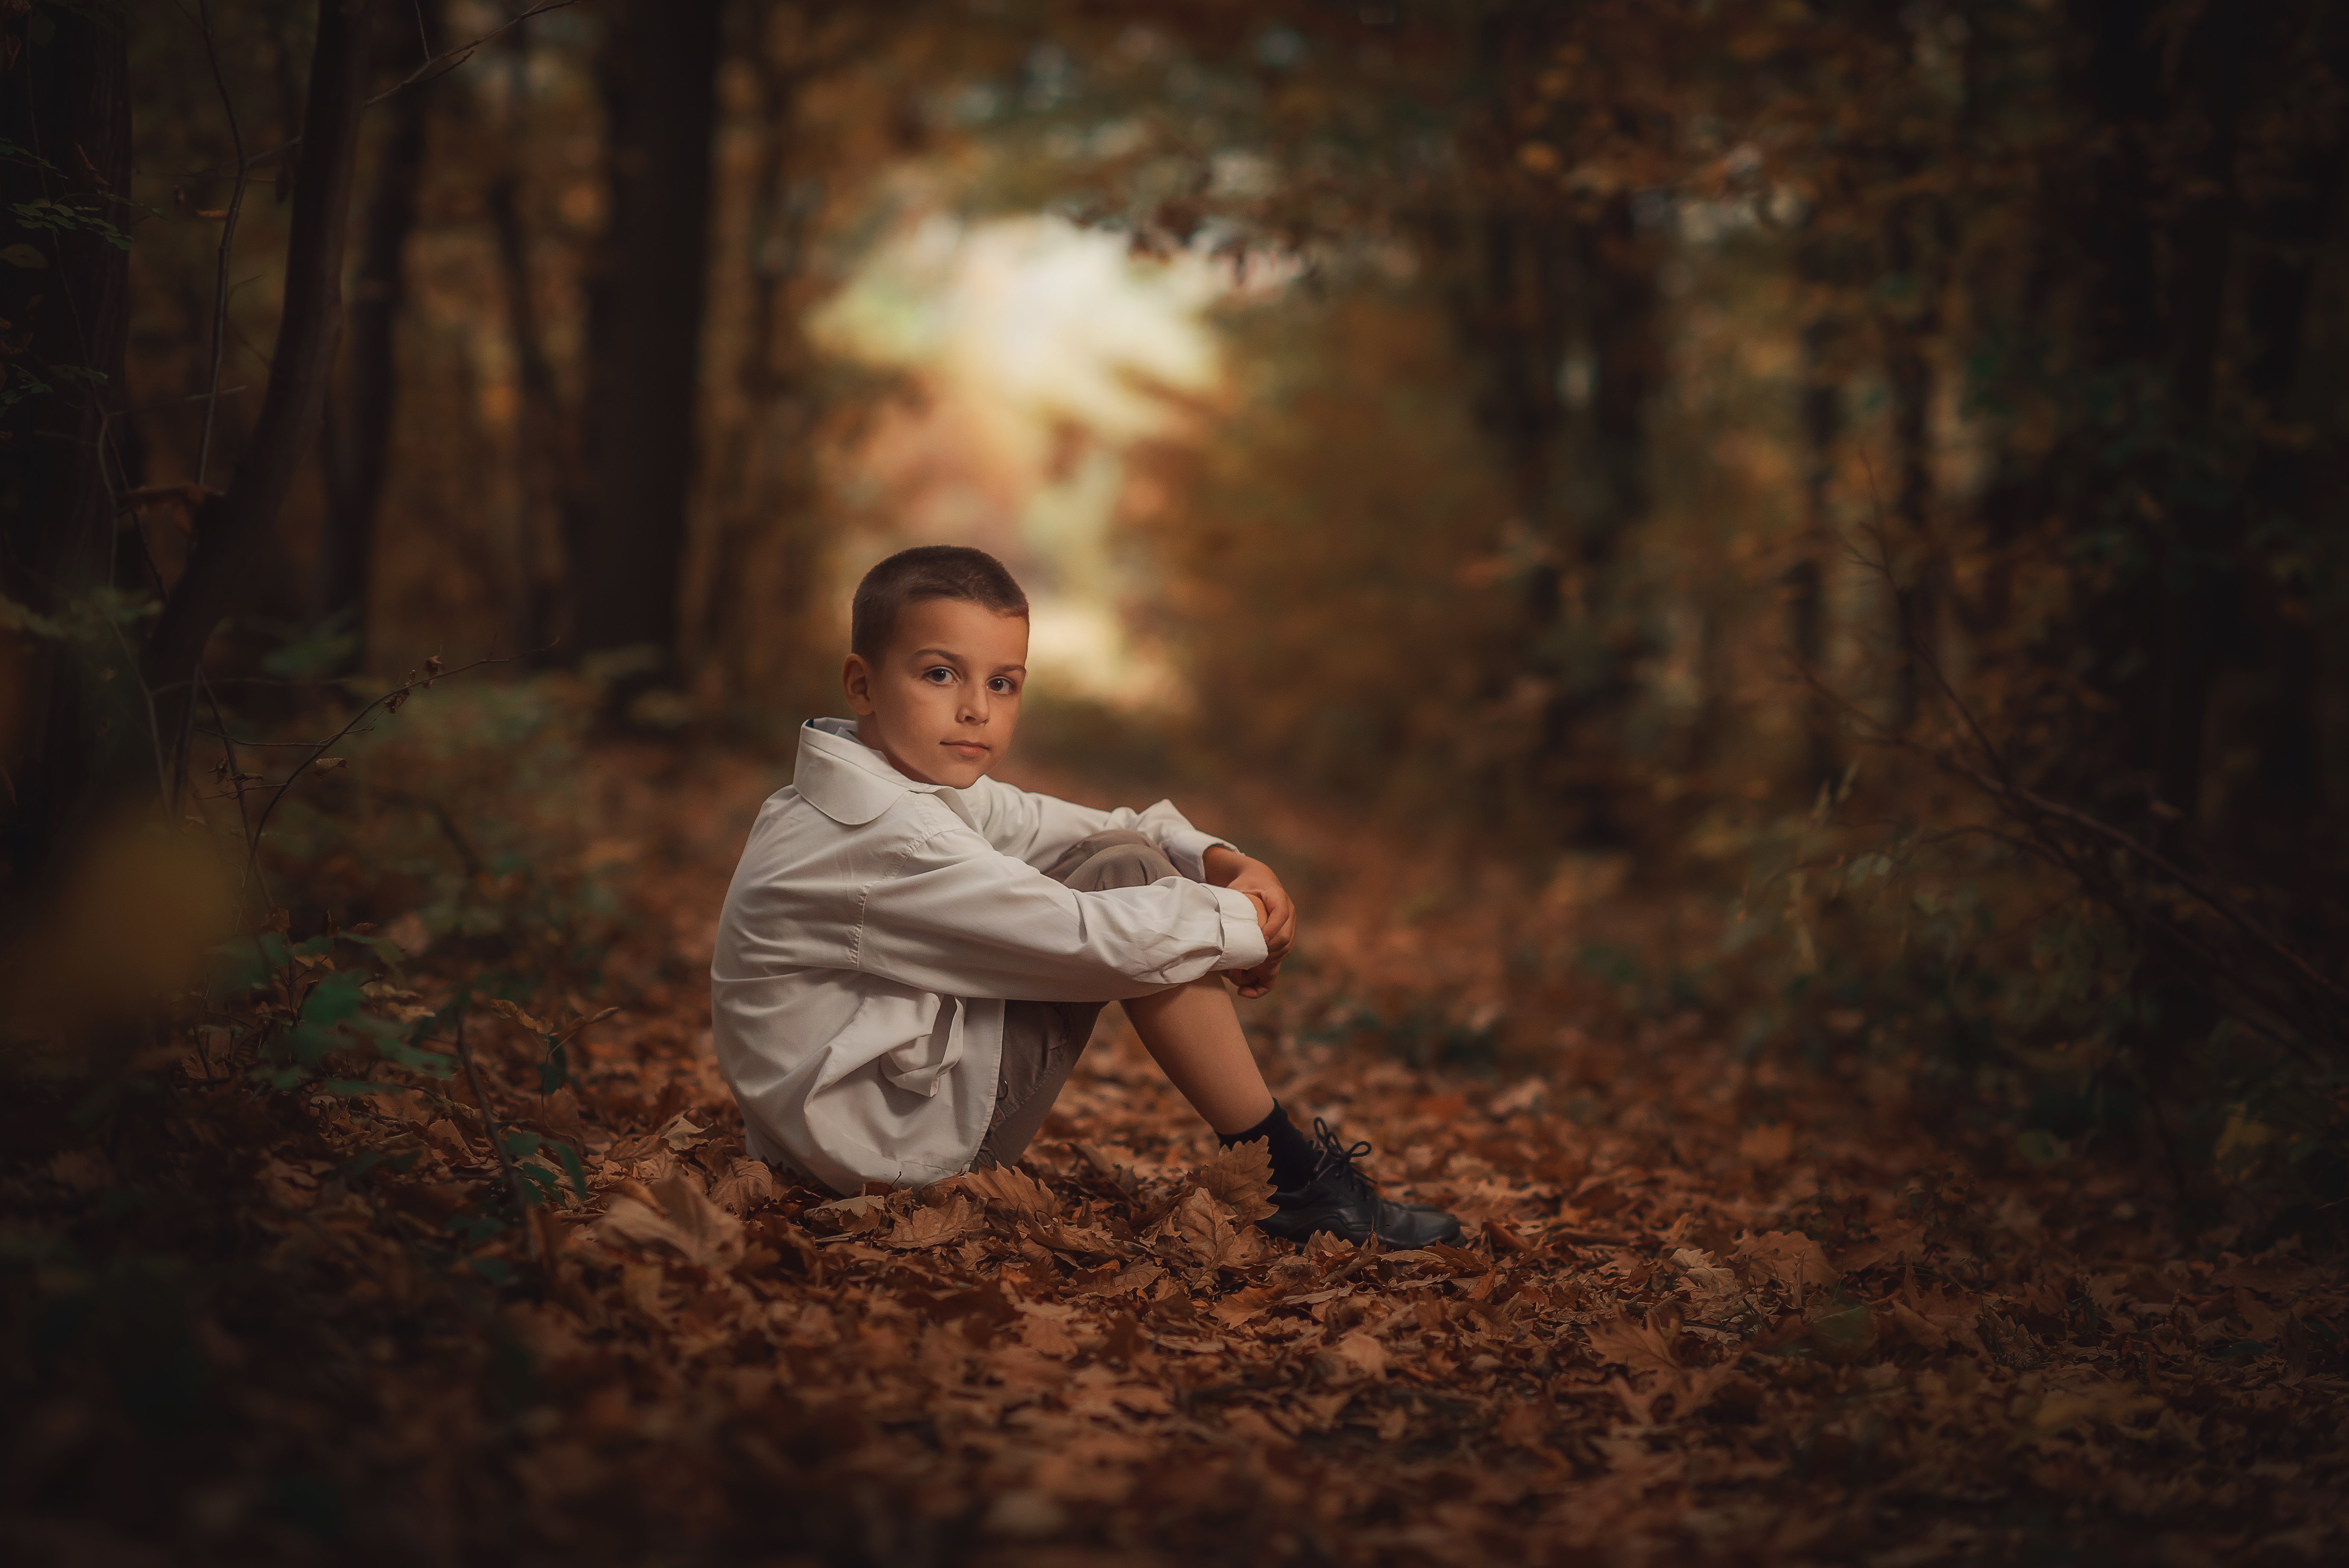 Portrait of boy sitting over autumn leaves in forest | Photo: Getty Images